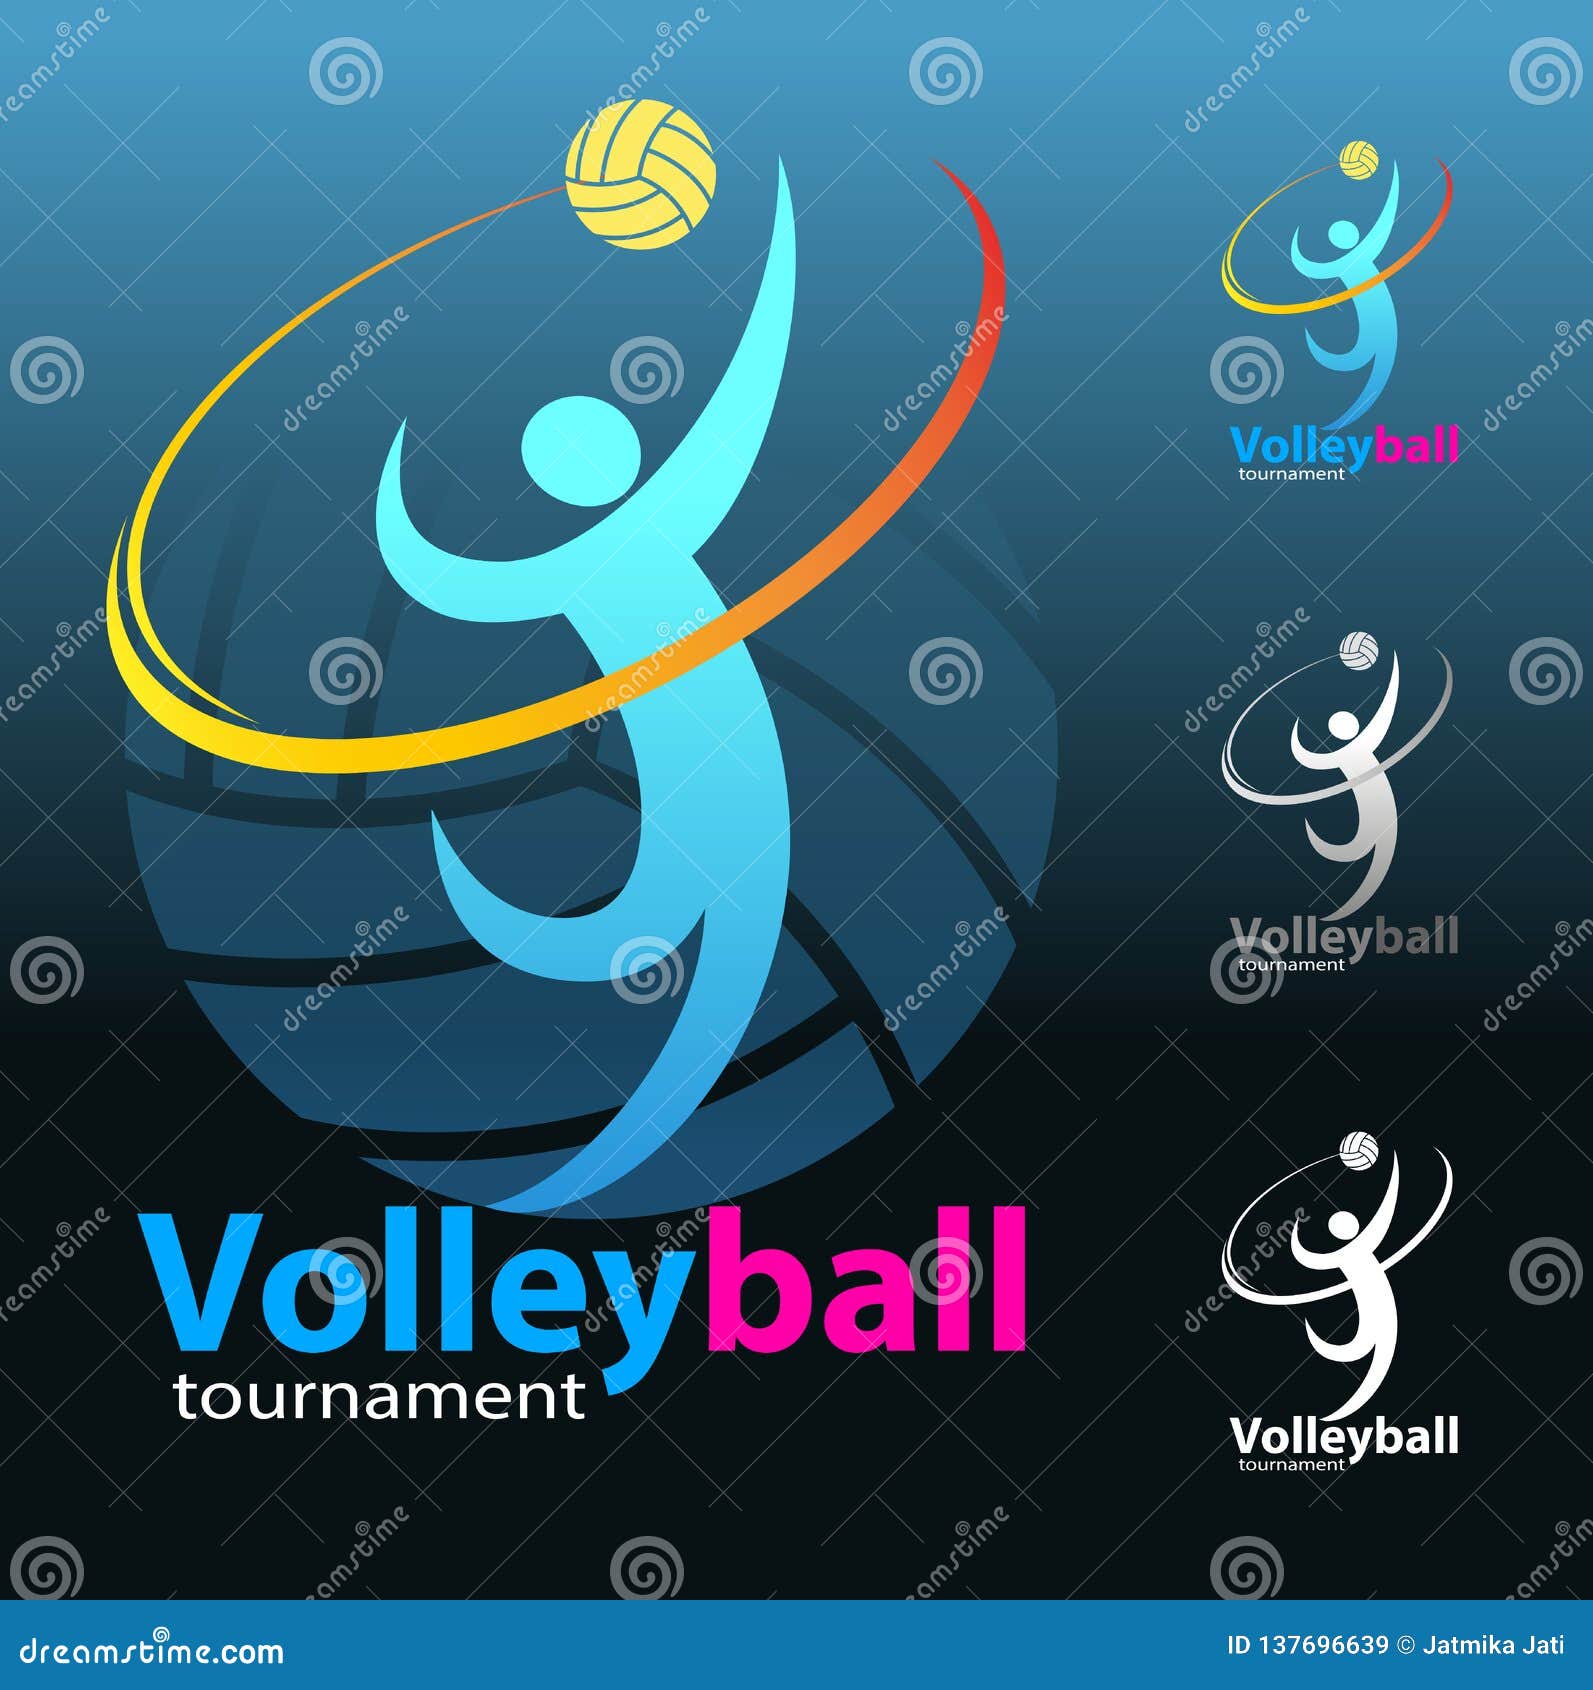 Volleyball Tournament Symbol Stock Vector - Illustration of female ...